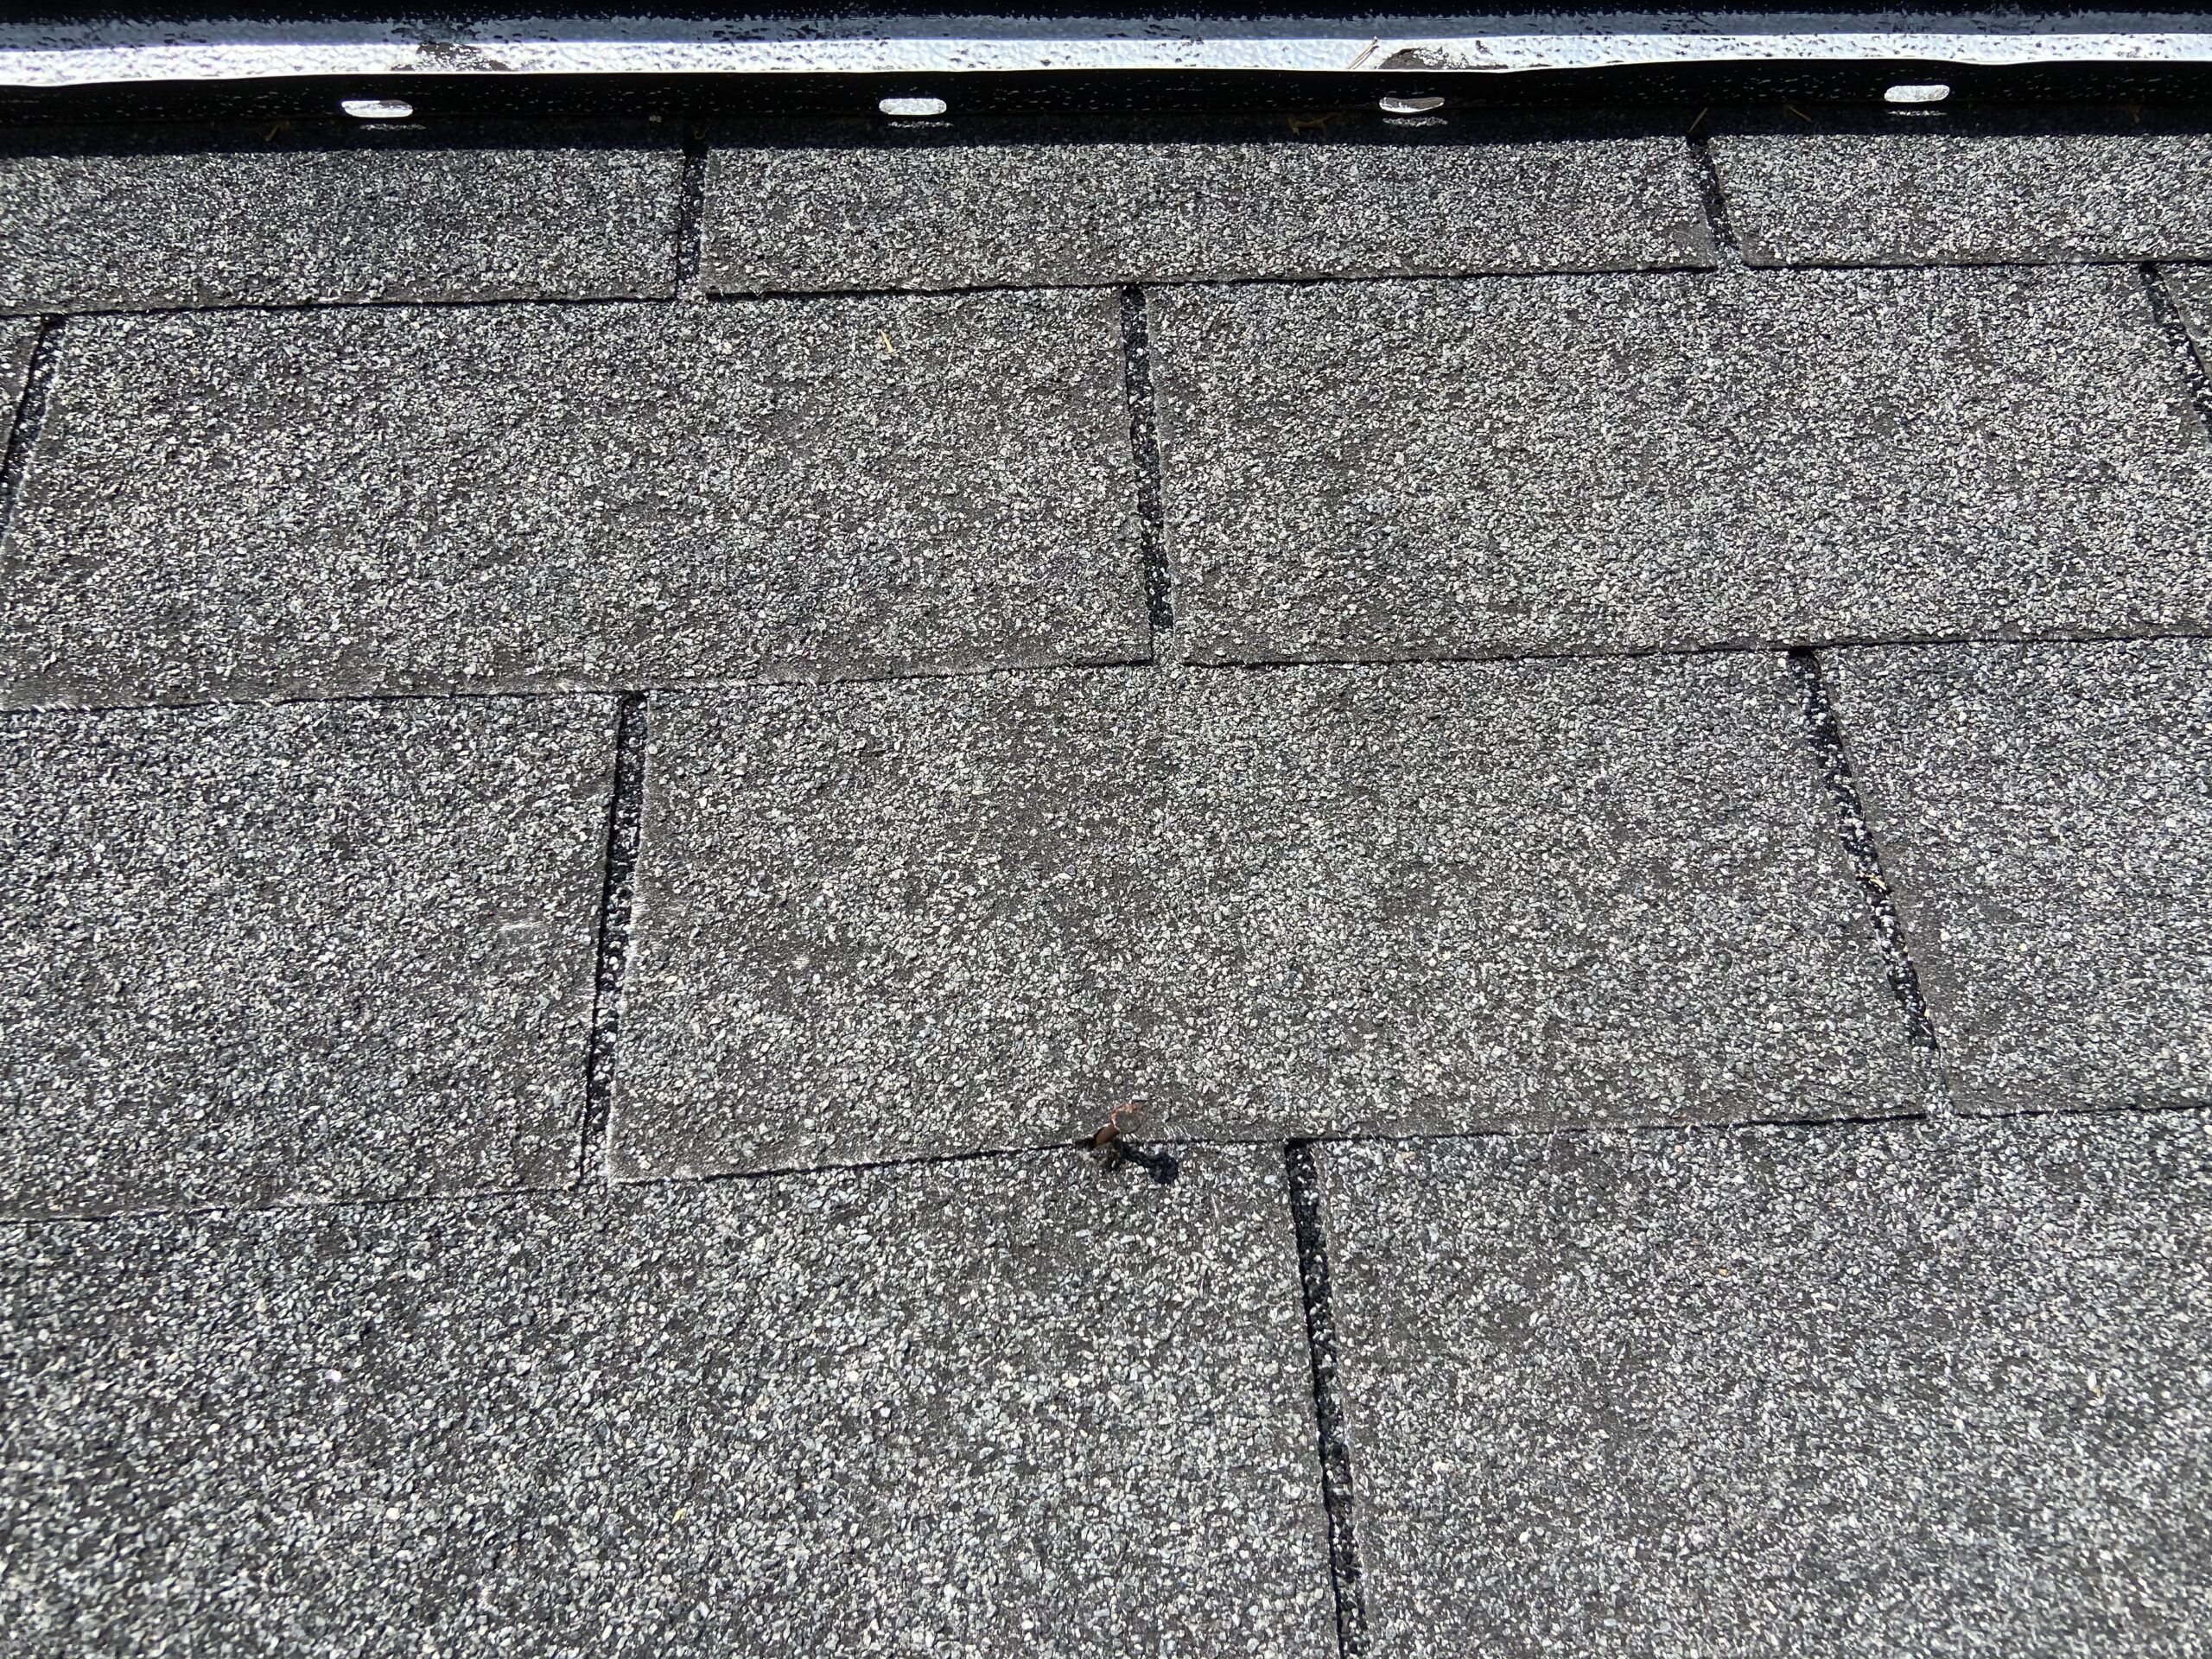 this is a picture os shingles that are worn out with most of the granules missing